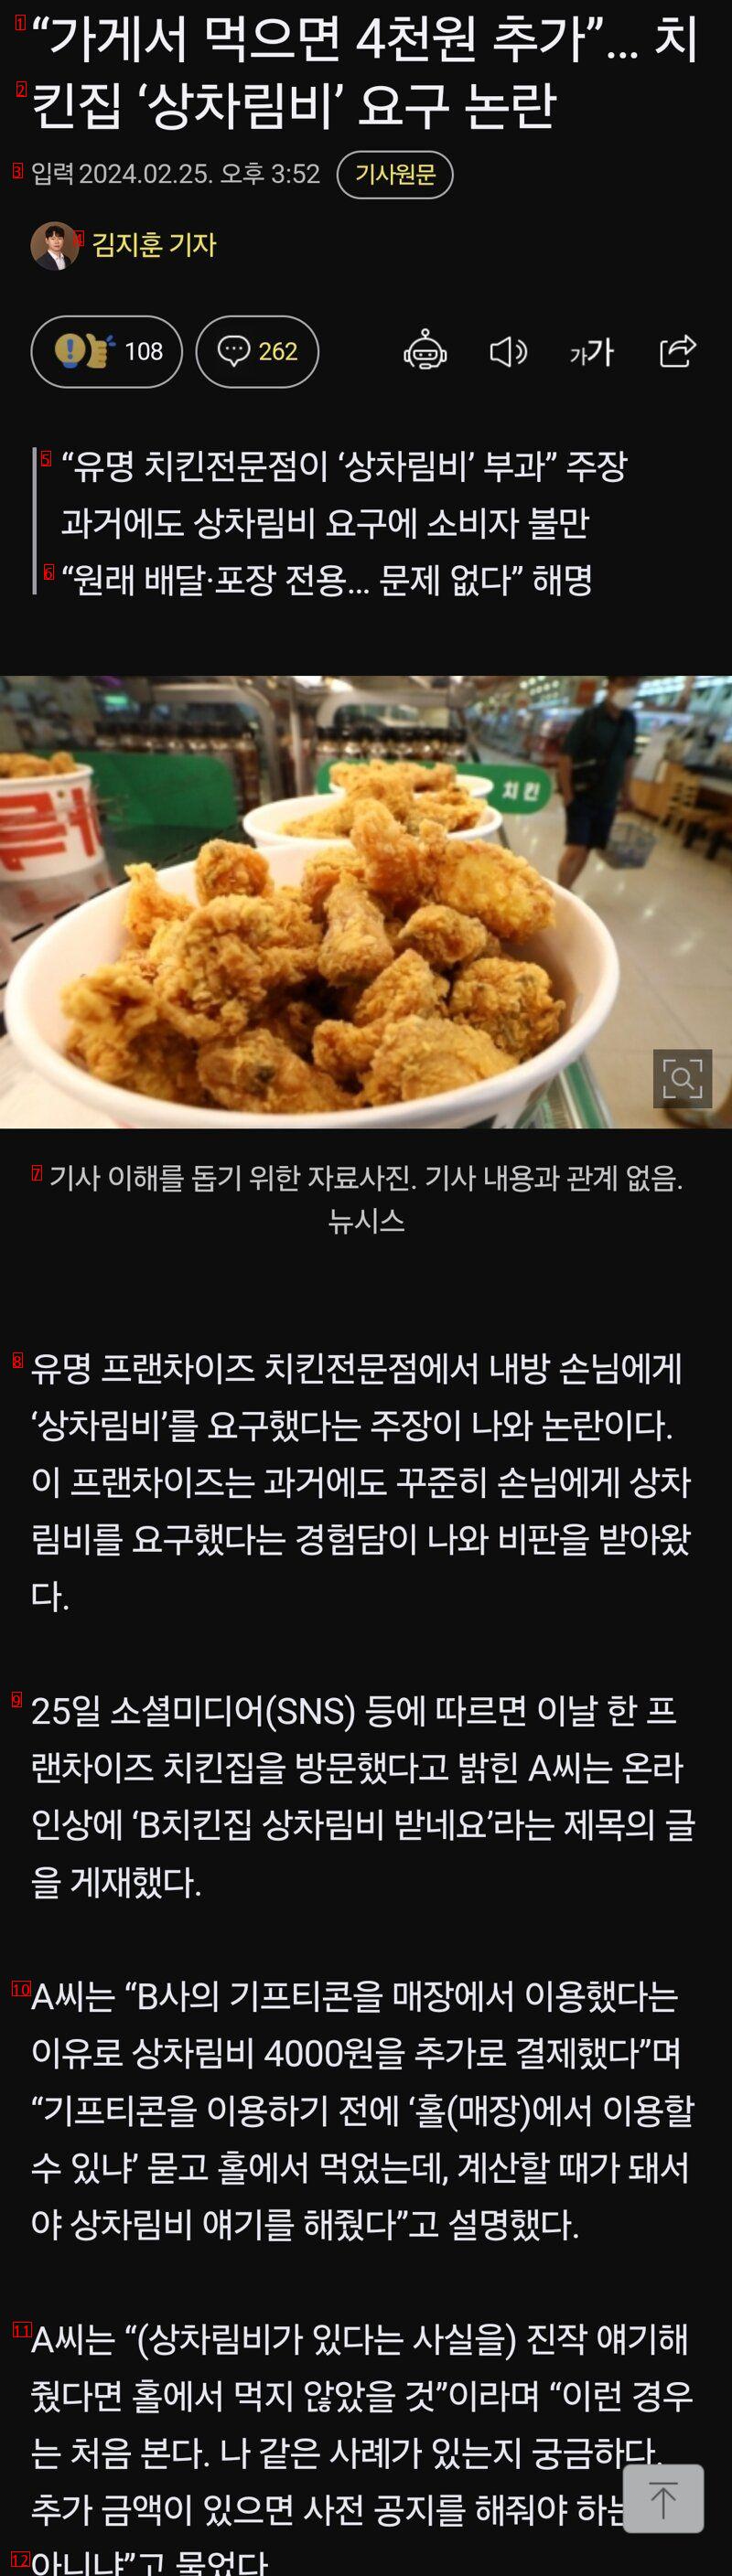 "If you eat at the store, you'll have to pay 4,000 won"… Controversy over the demand for 'Chicken restaurant table setting fee'